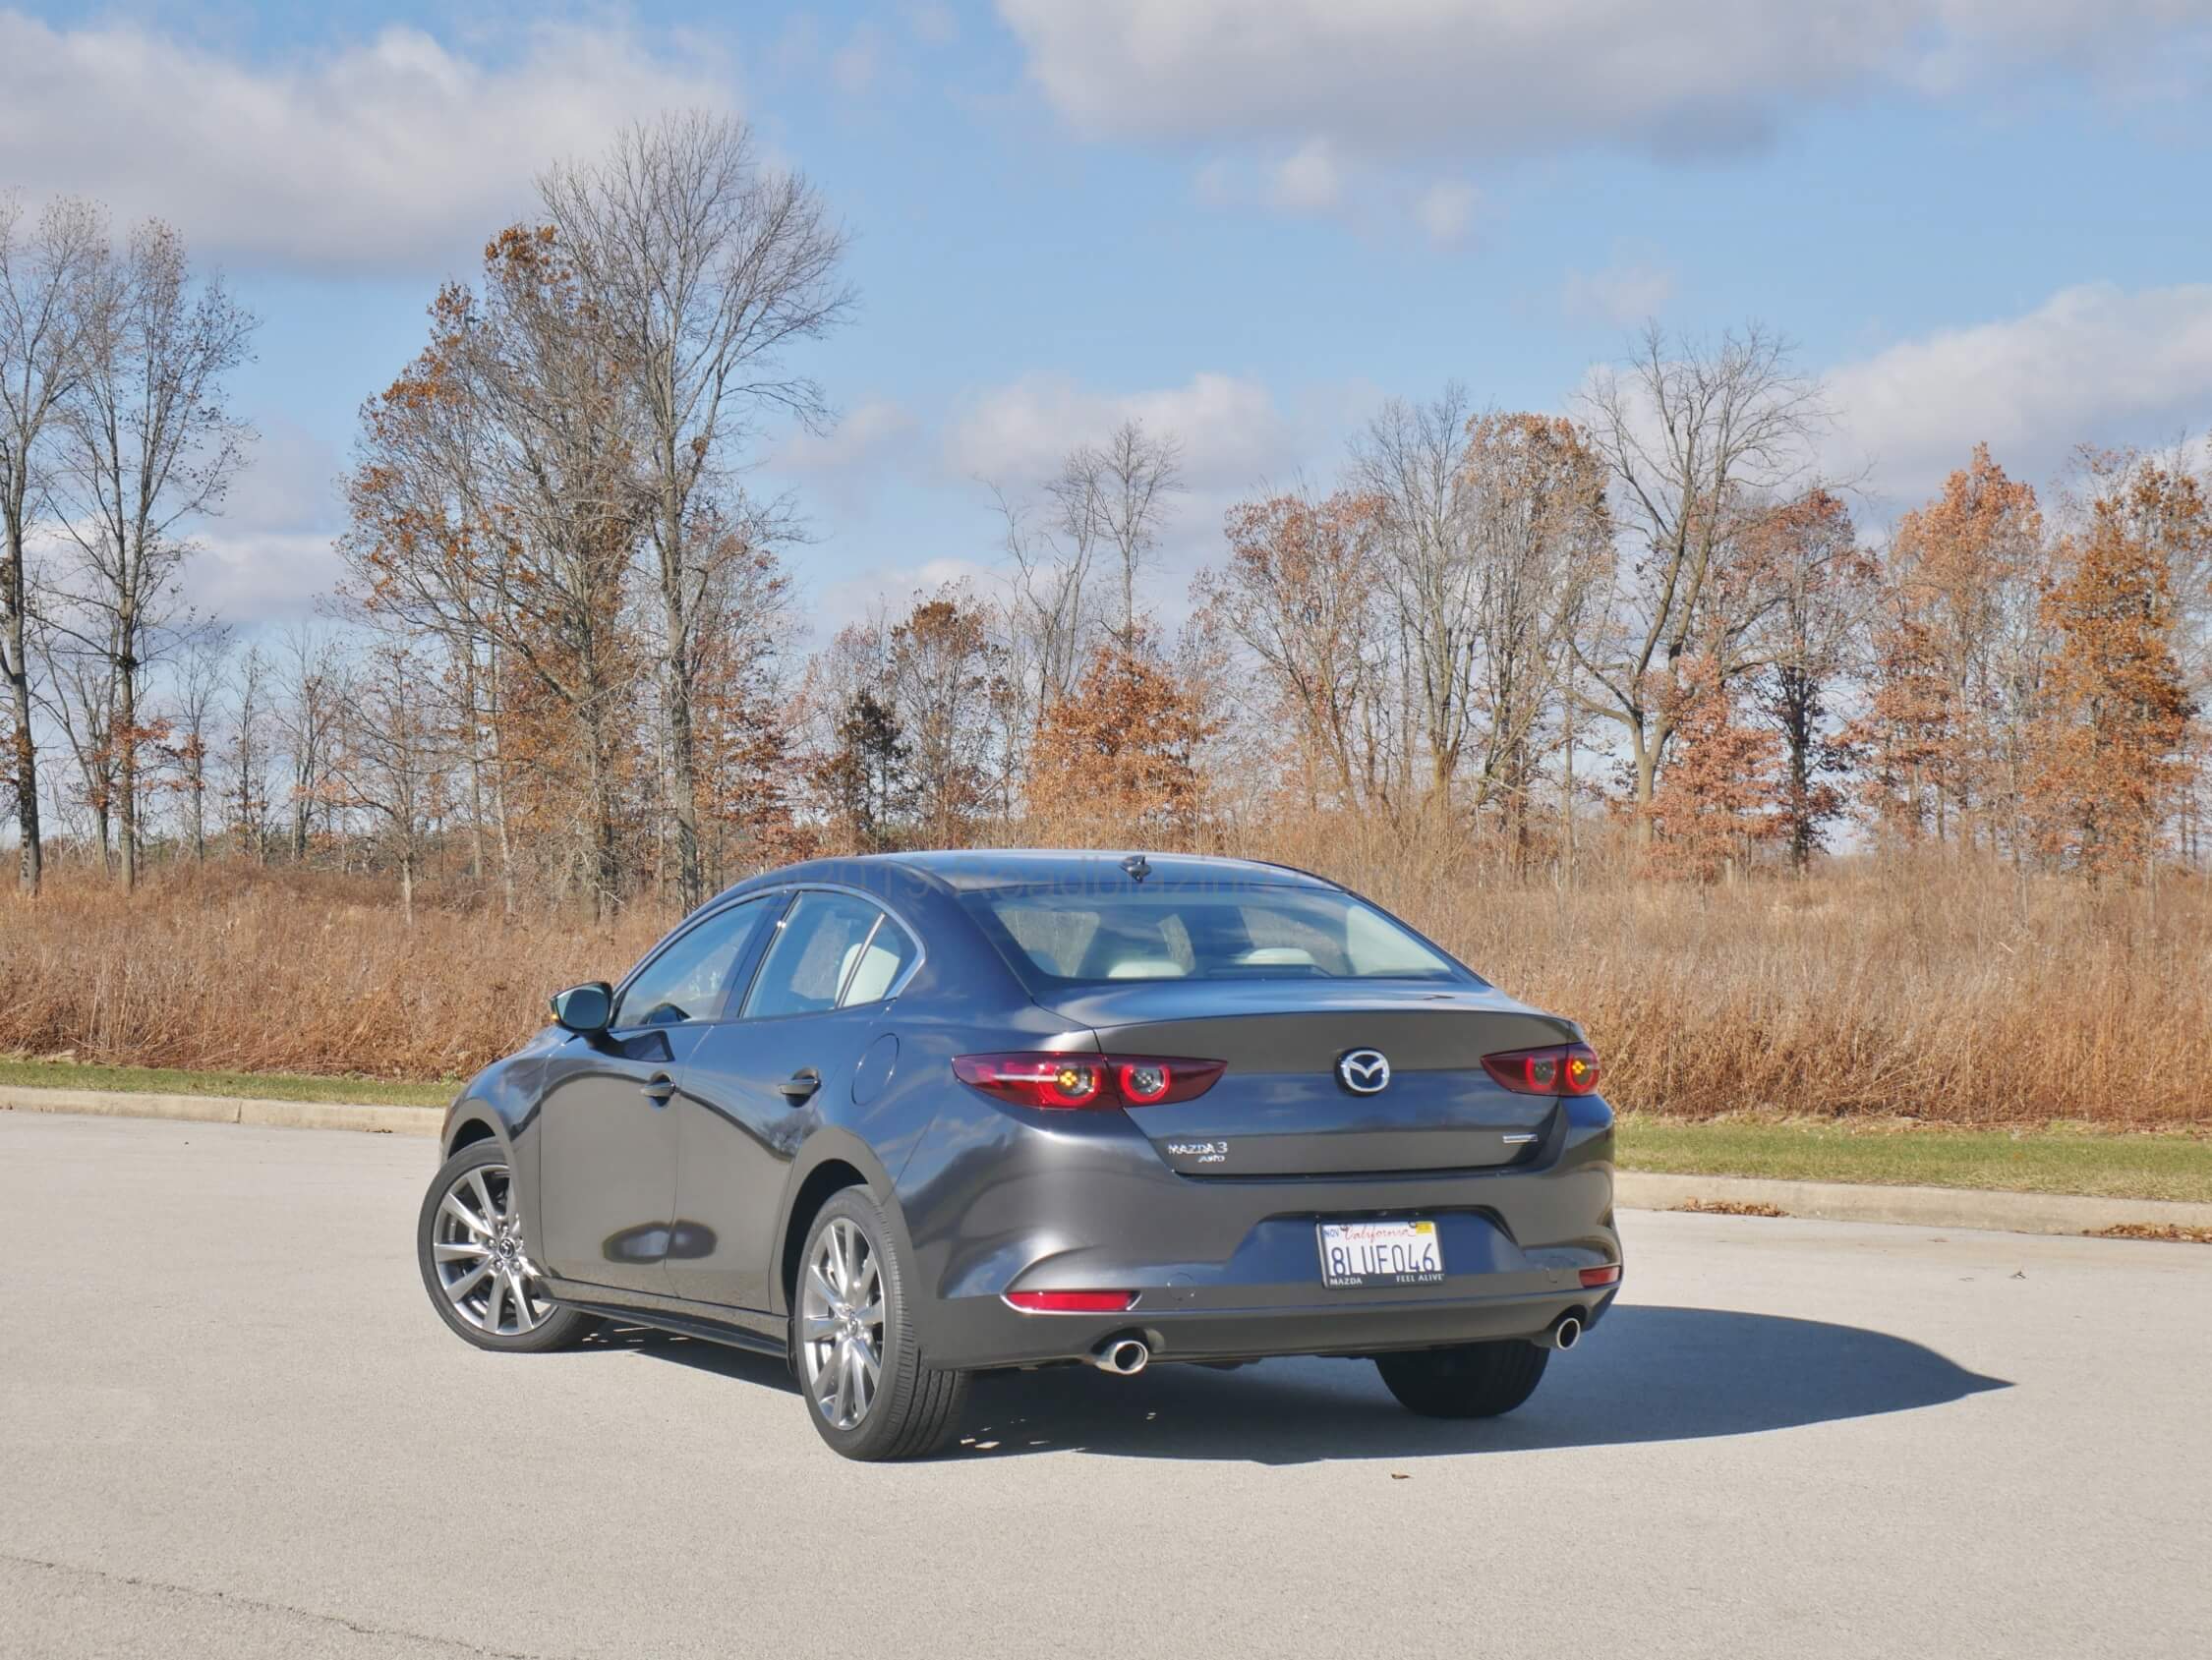 2020 Mazda 3 sedan awd premium: sharing heritage with the MX-5 results in adoption of smooth bevel trunk lid w/ ducktail edge and circular directional taillamps with wrap around arrows.